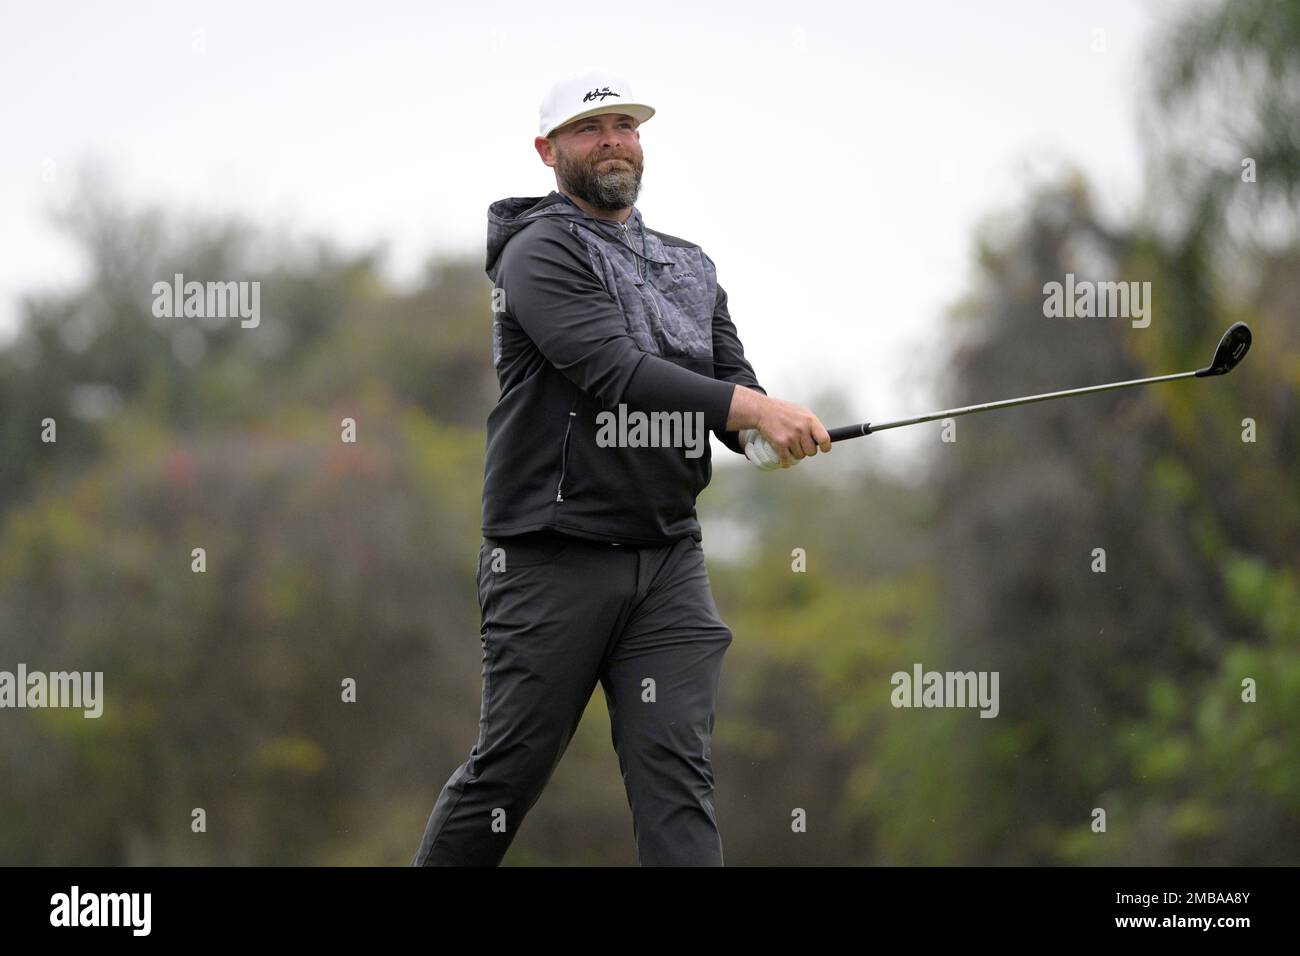 Former professional baseball player Brian McCann watches after hitting from  the ninth fairway during the third round of the Tournament of Champions  LPGA golf tournament, Saturday, Jan. 22, 2022, in Orlando, Fla. (